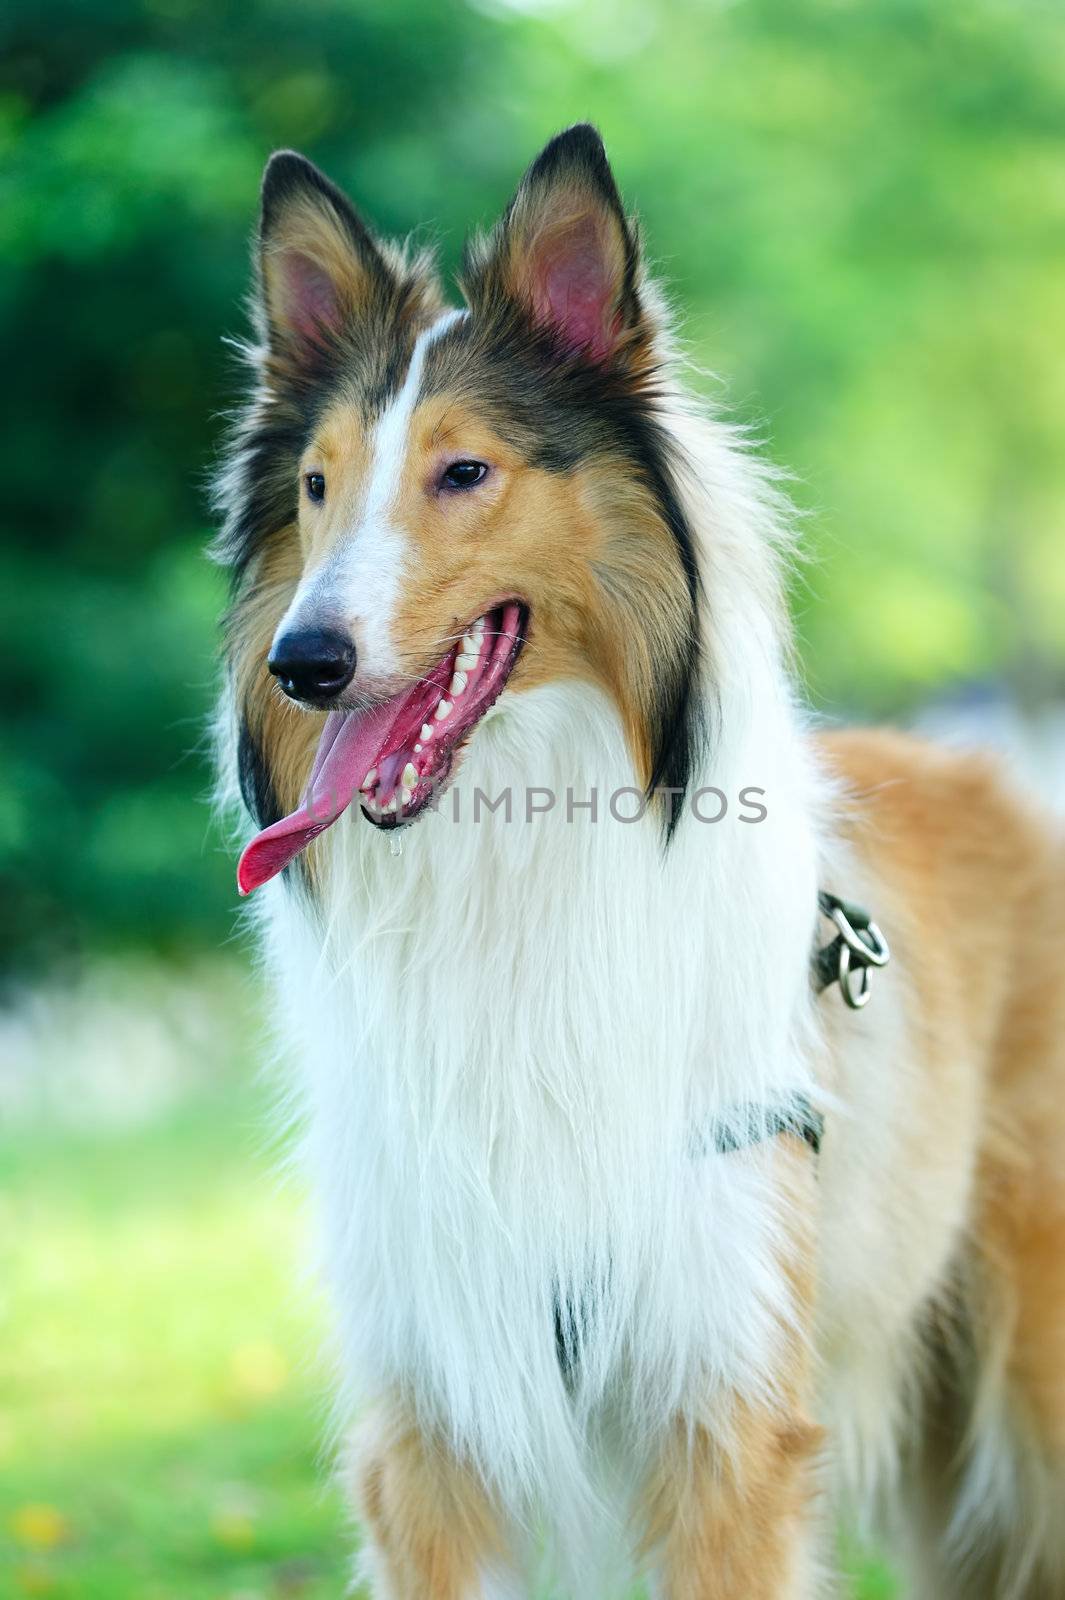 Collie rough dog by raywoo